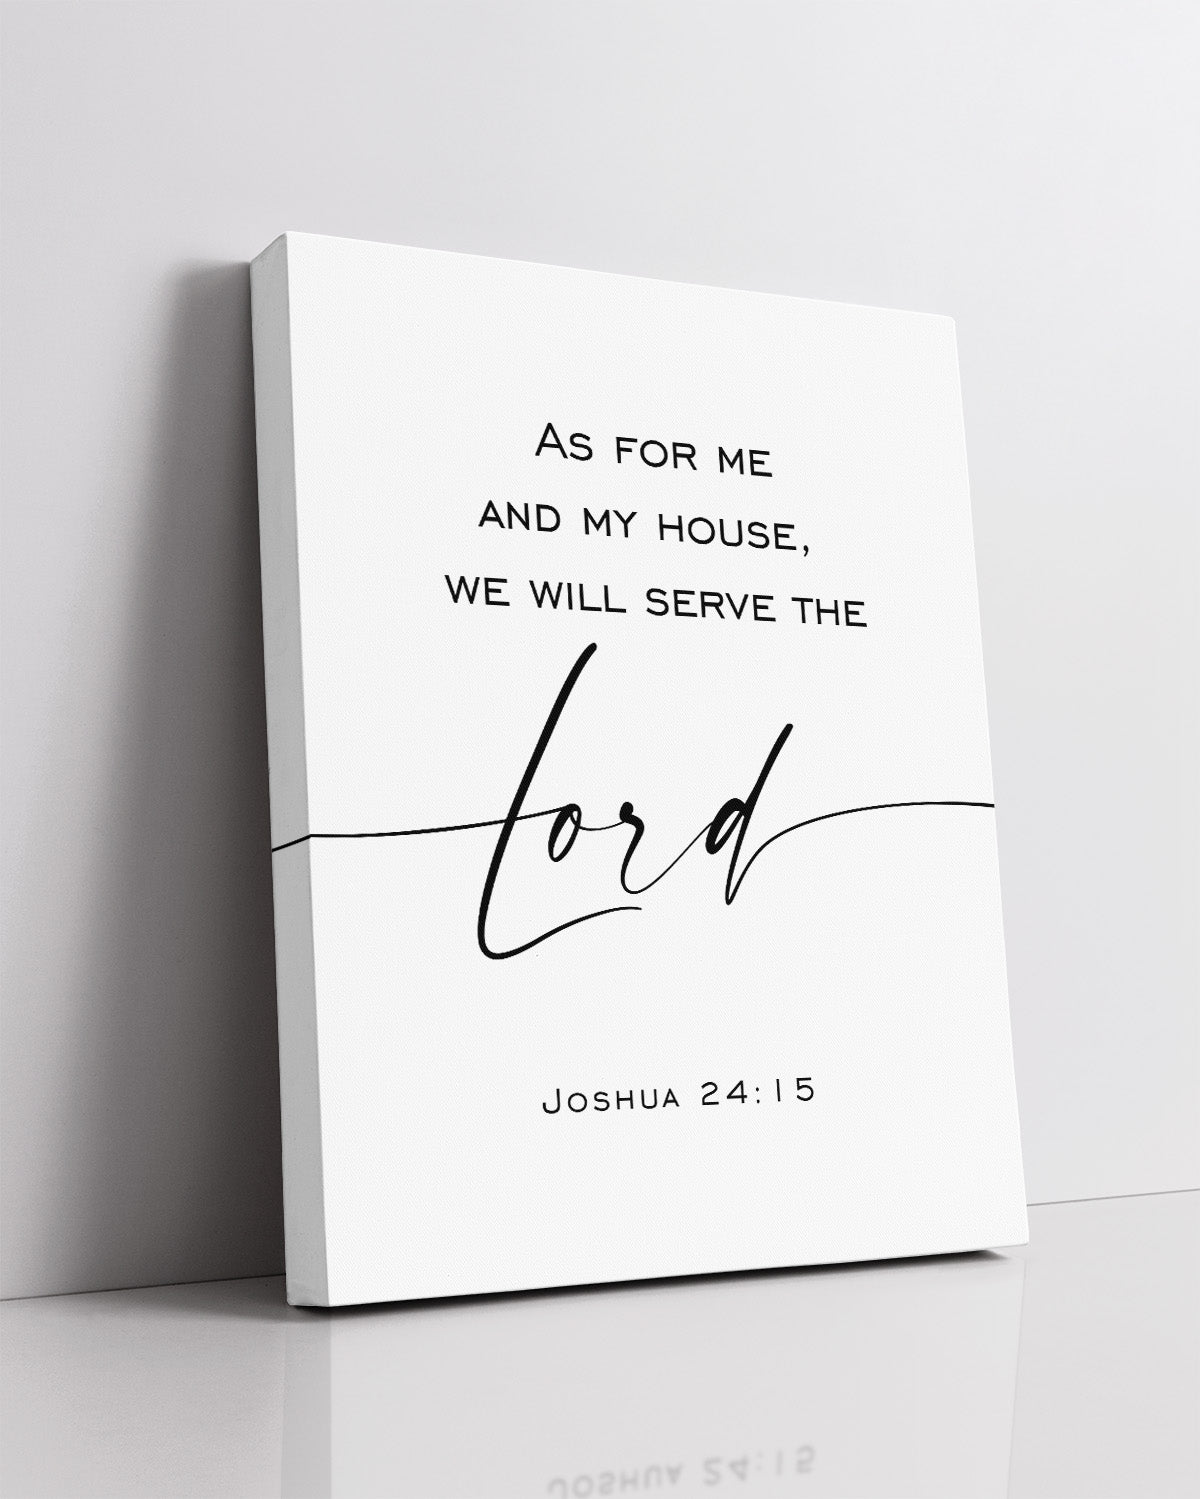 Bible Verses Wall Decor - We will serve the lord - Canvas Religious Wall Art